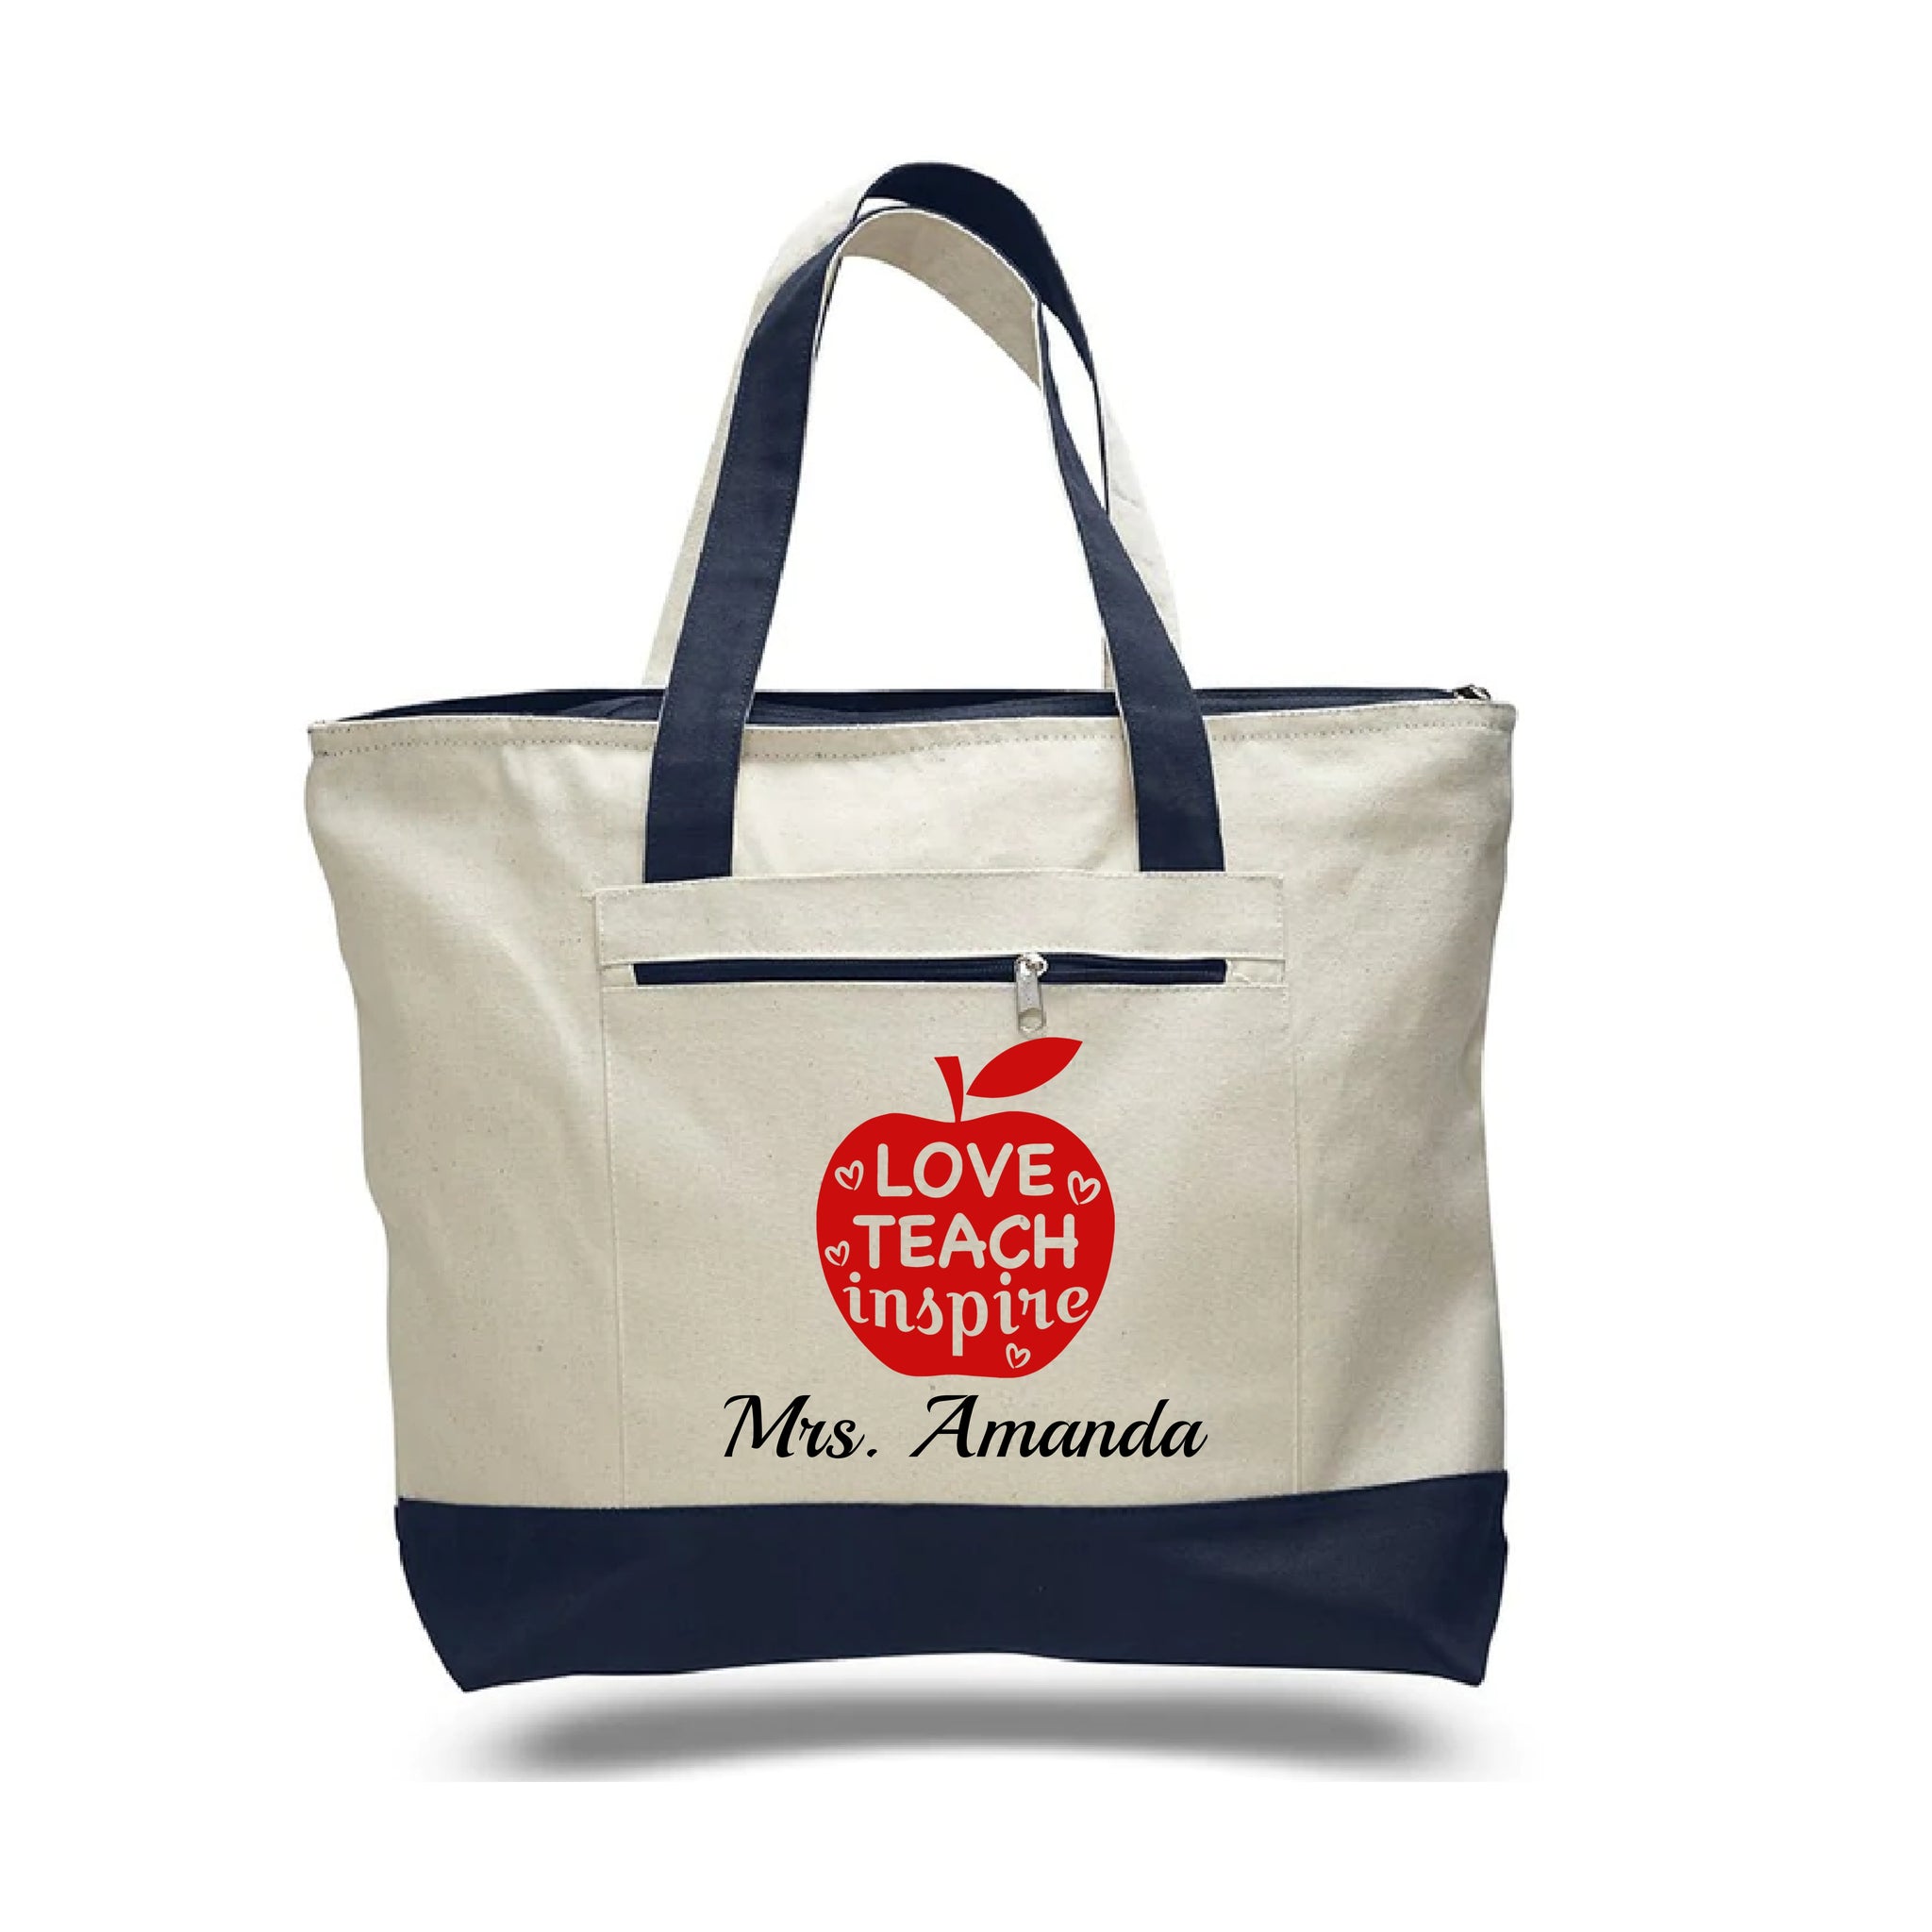 Personalized Teacher Appreciation Tote Bag Gifts w/Name - 6 Designs -  Customized Monogrammed Teacher Tote Bags - Custom Teacher Birthday Gifts  for